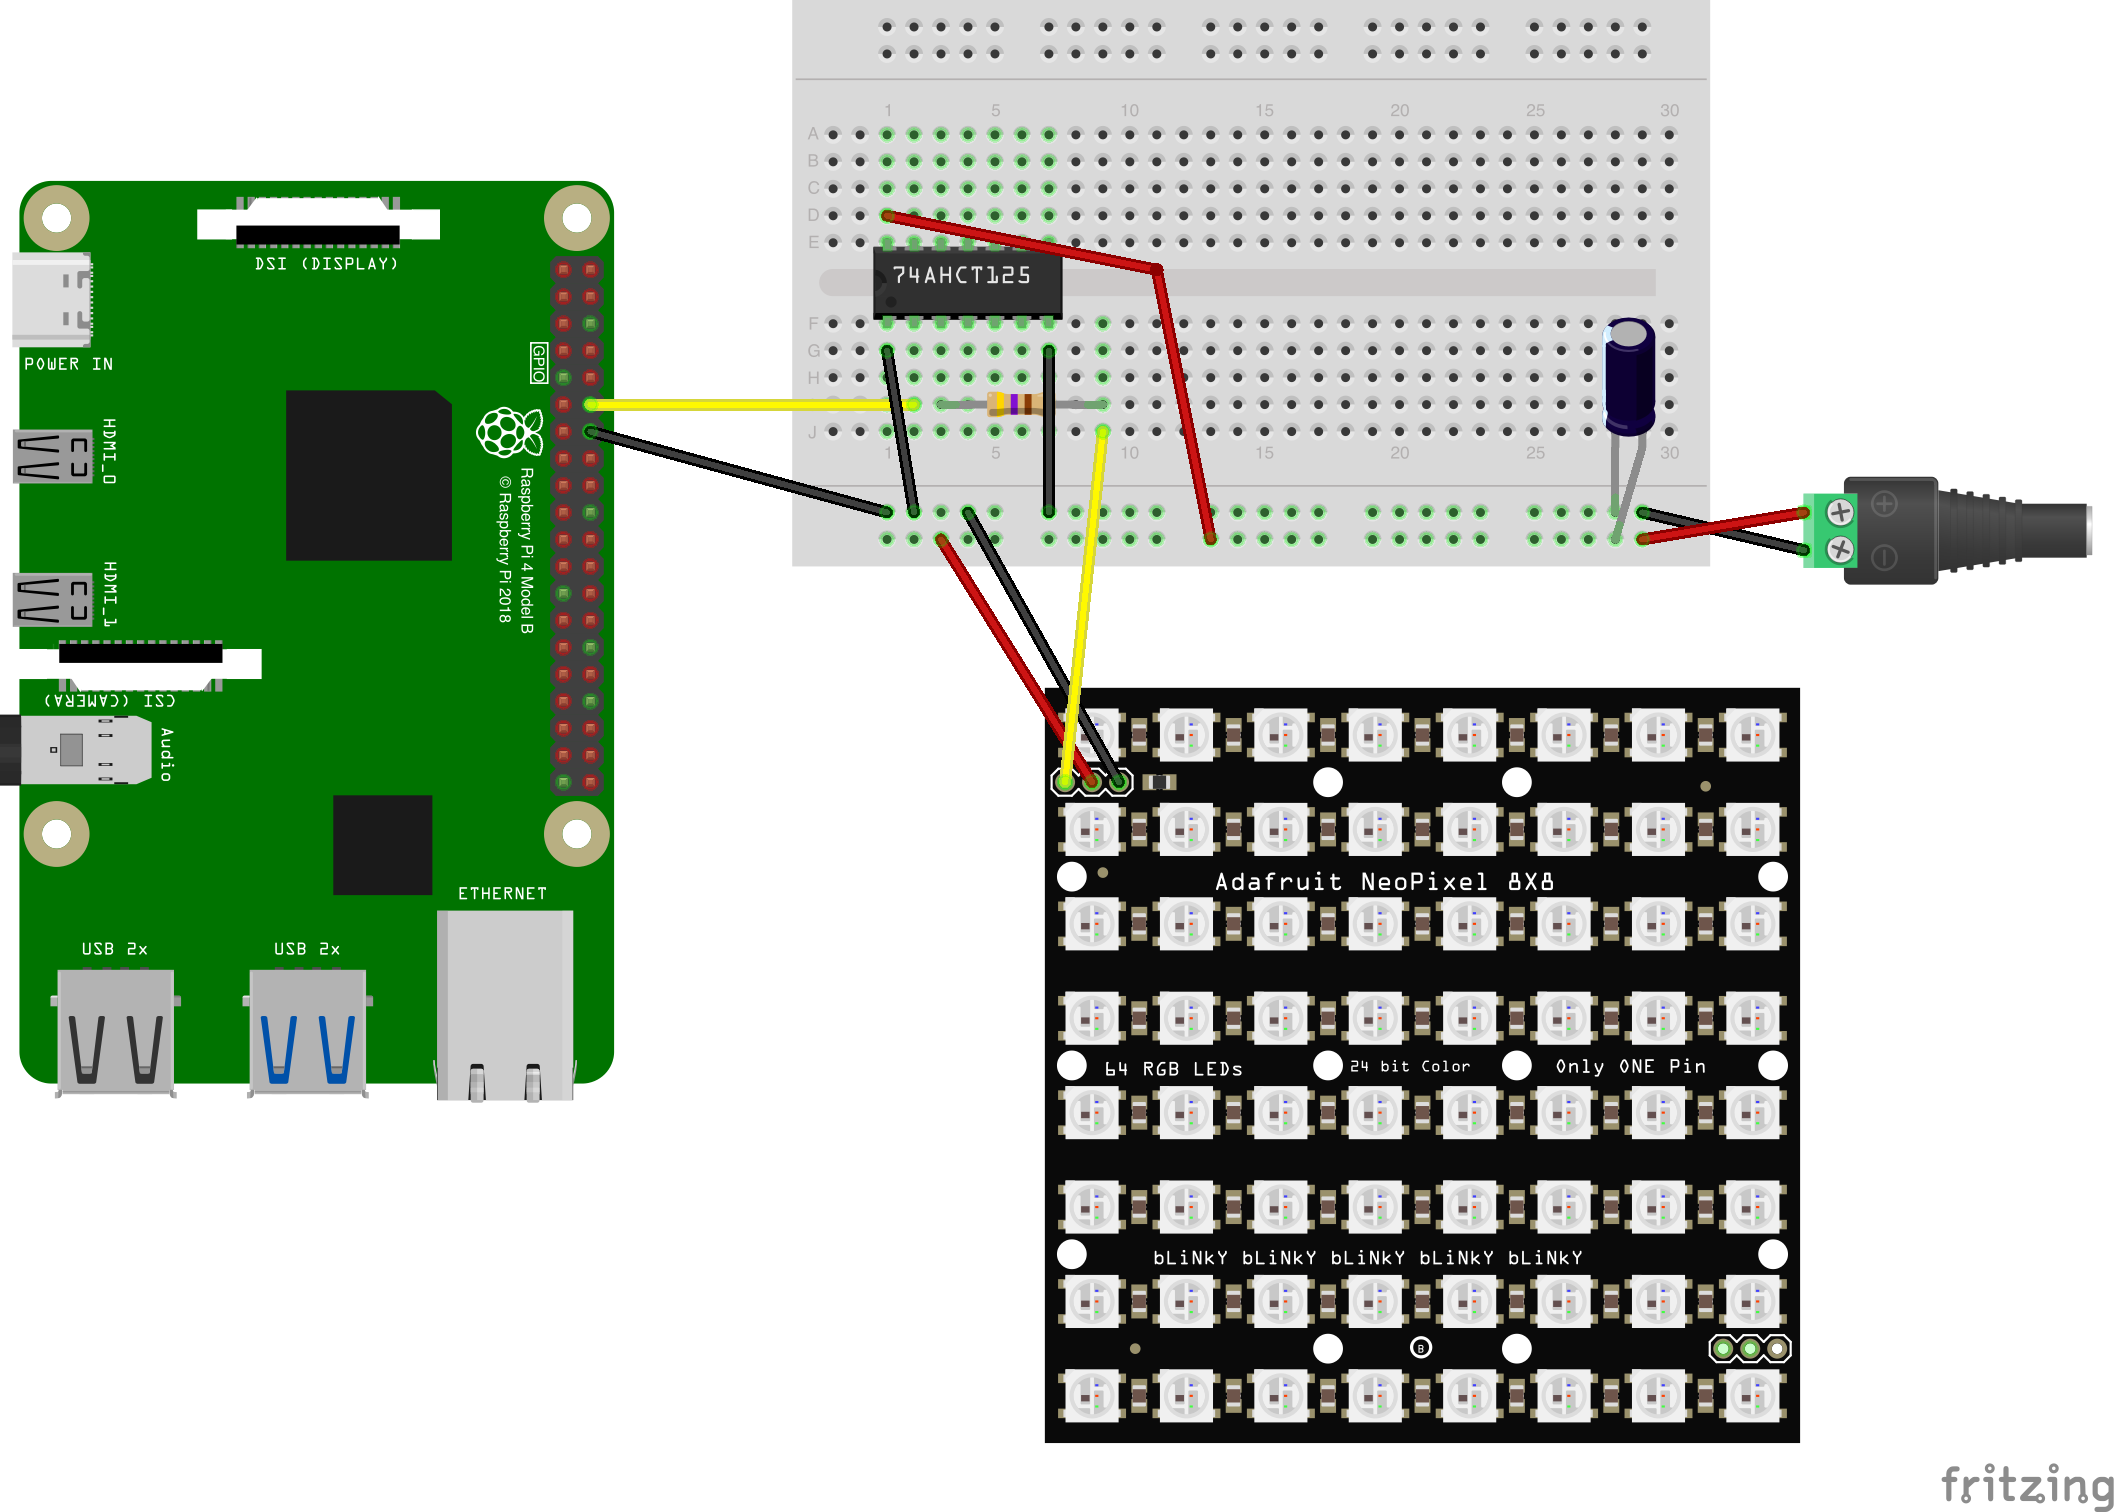 Design for the board linking Neopixel and Raspbery Pi